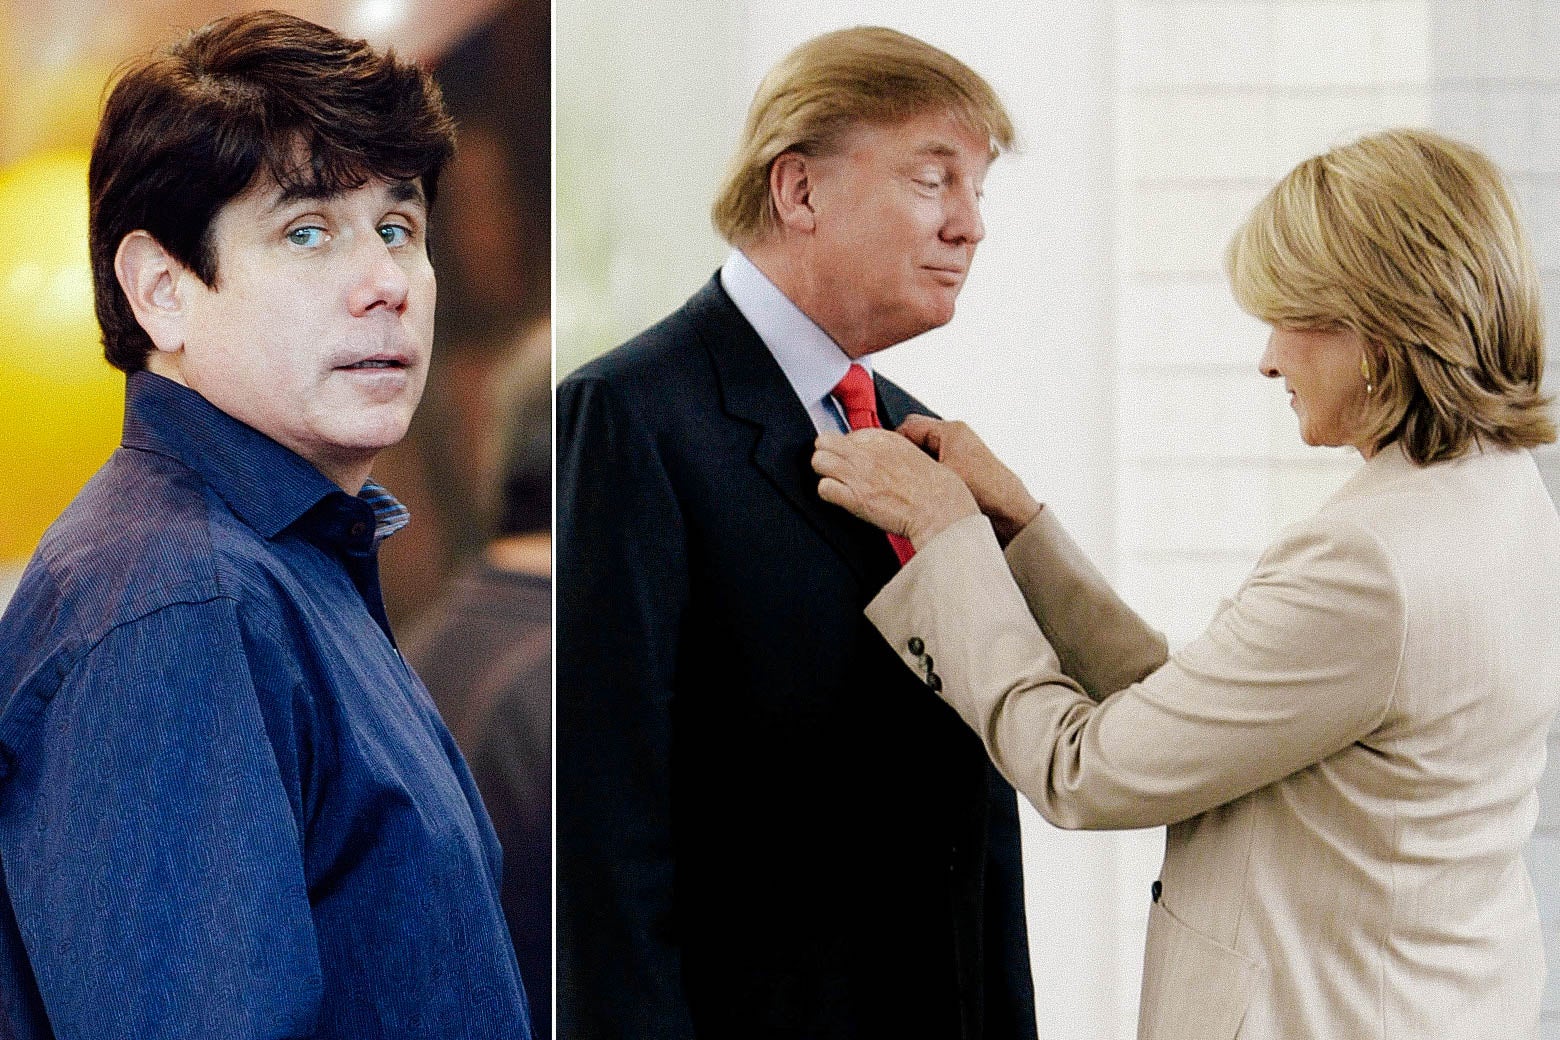 Rod Blagojevich looks at the camera. Martha Stewart fixes Donald Trump's tie in a separate image.